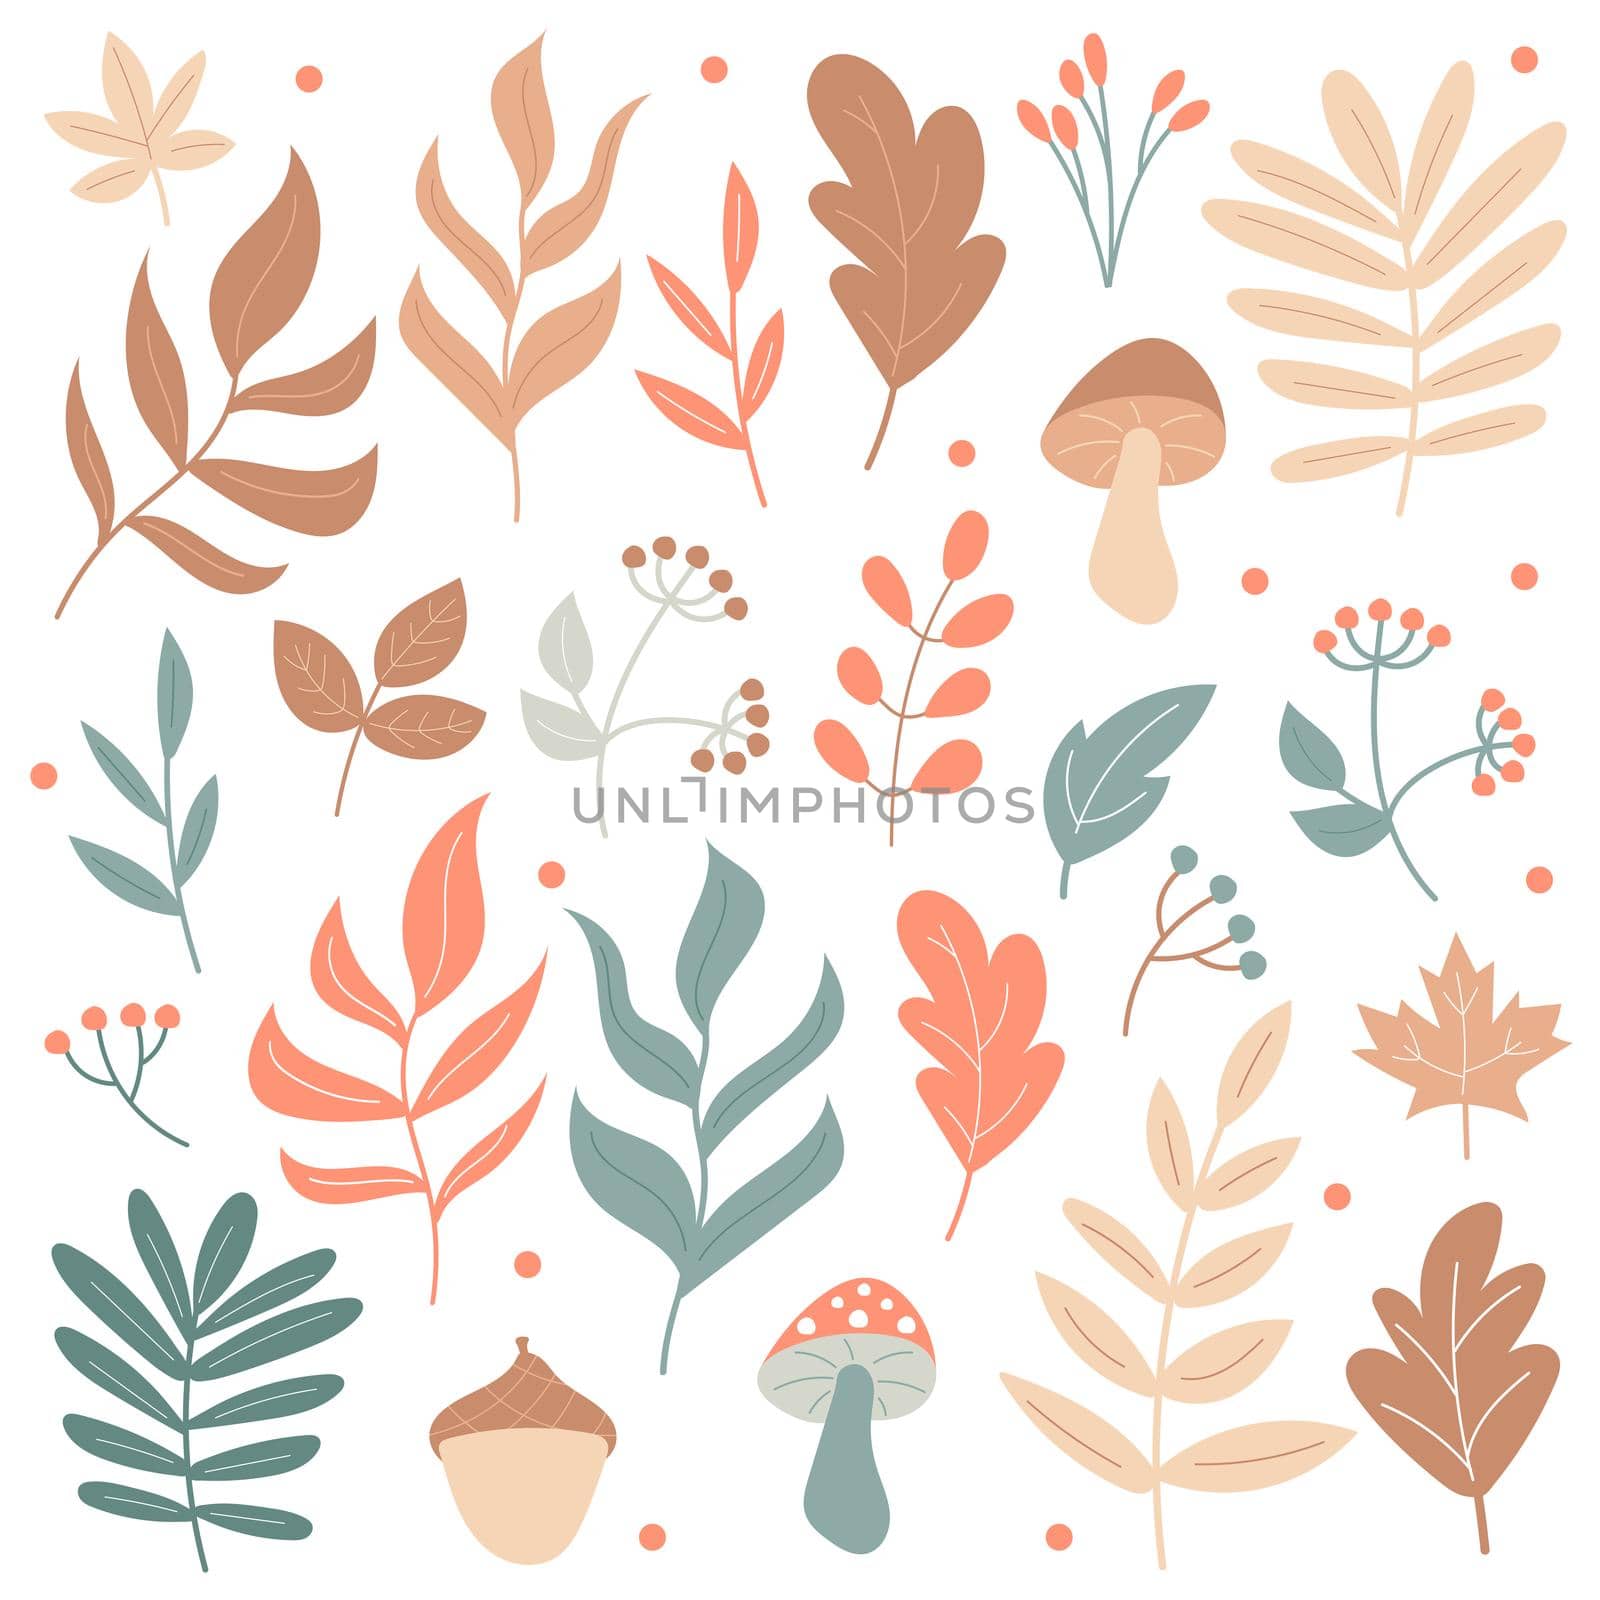 Big set of Autumn elements - mushrooms and plants - on a white background by natali_brill